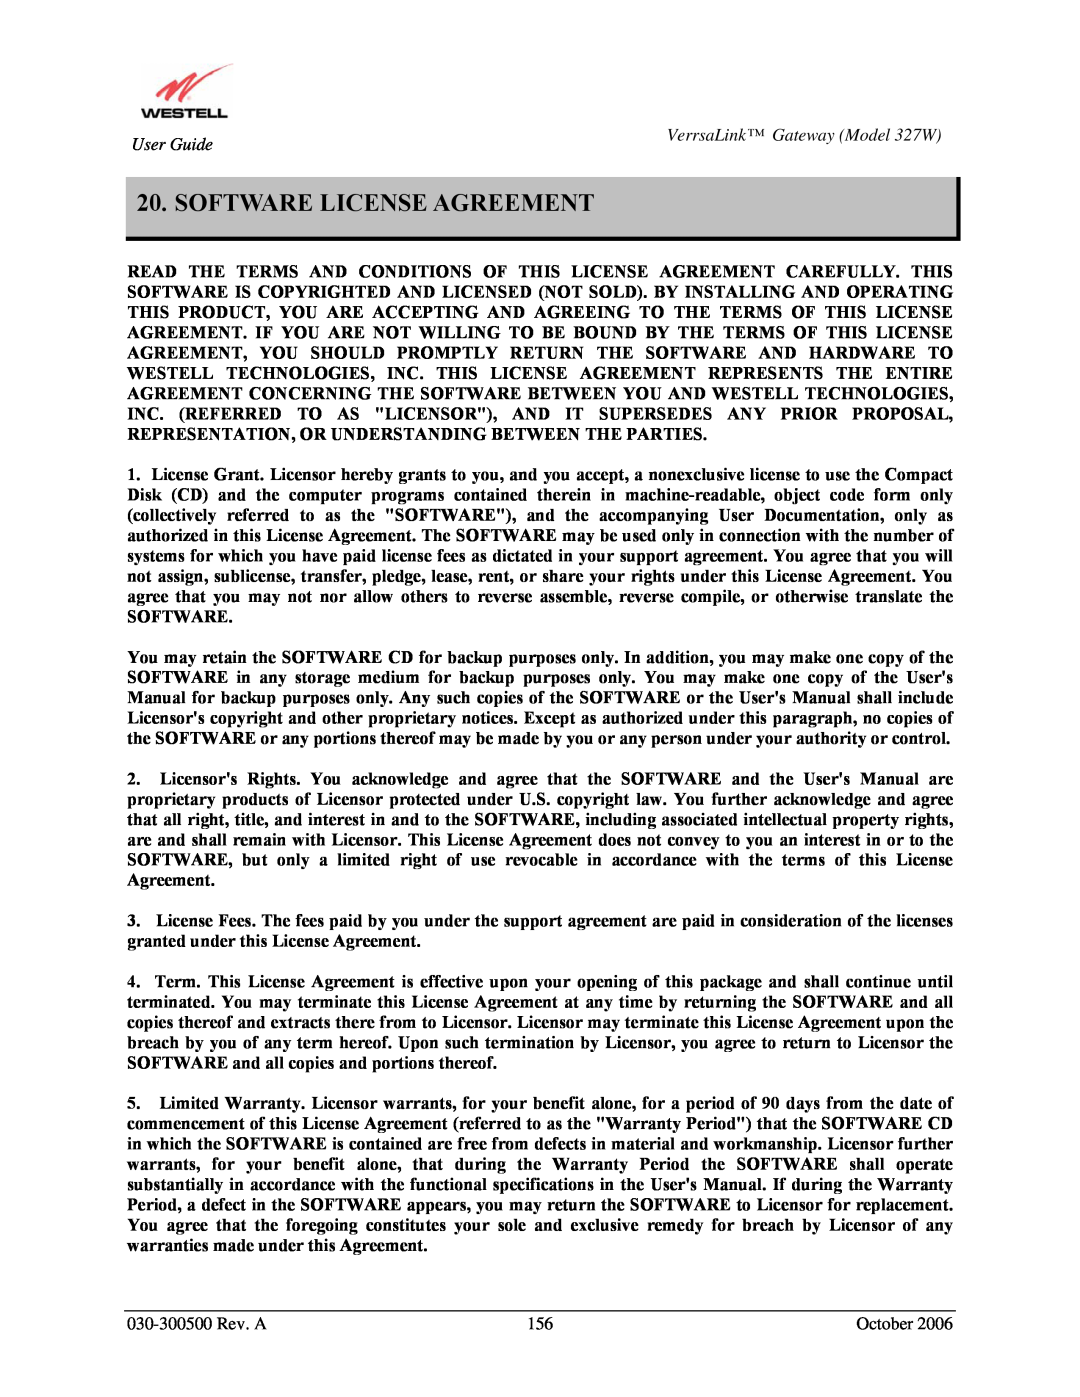 Westell Technologies 327W manual Software License Agreement 